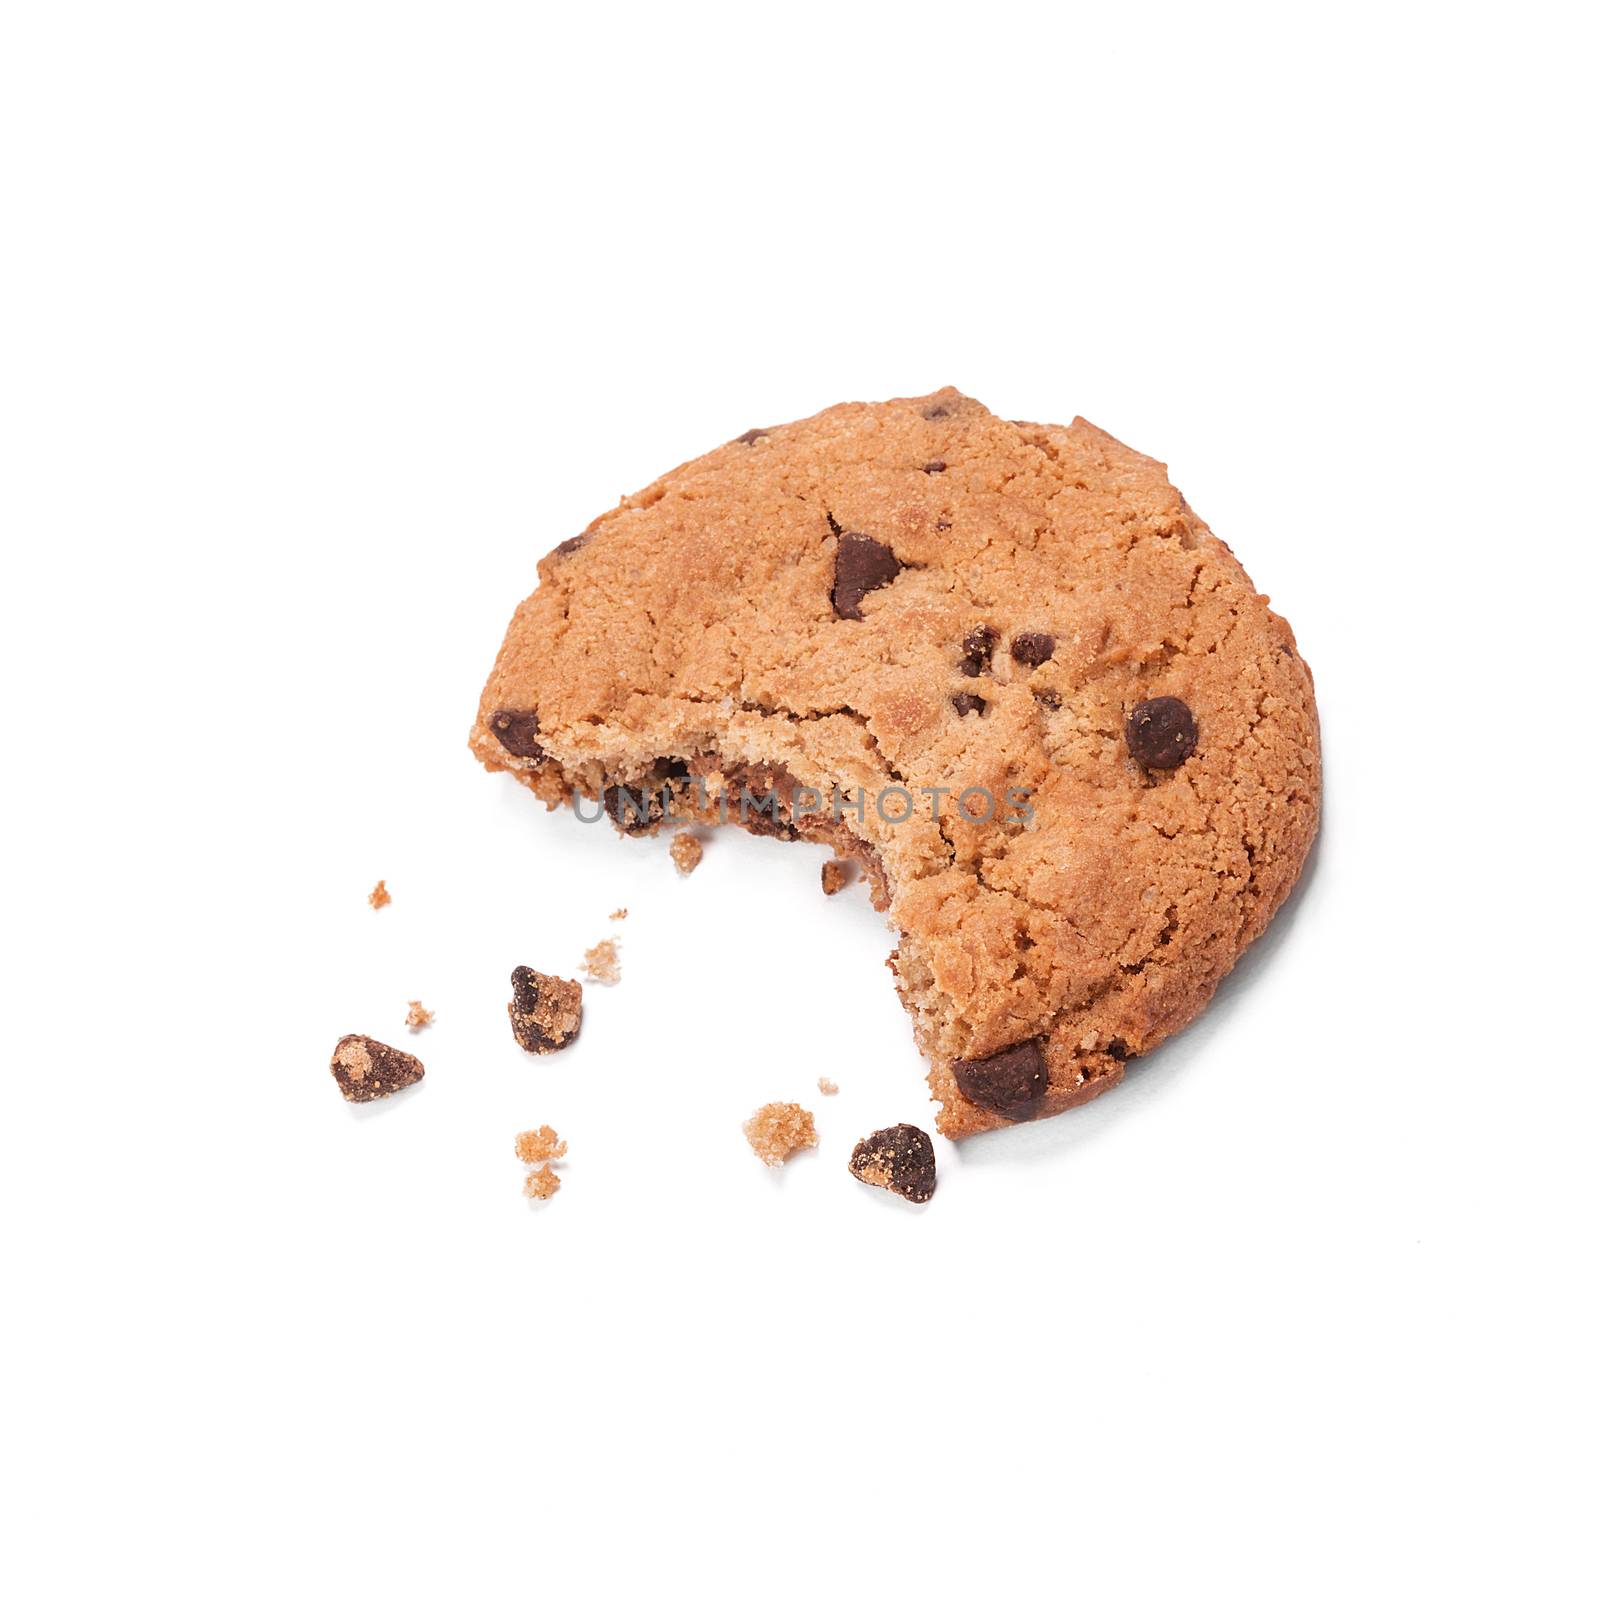 Single round chocolate chip biscuit with crumbs and bite missing, isolated on white from above. Sweet biscuits. Homemade pastry. Chocolate chip cookie.